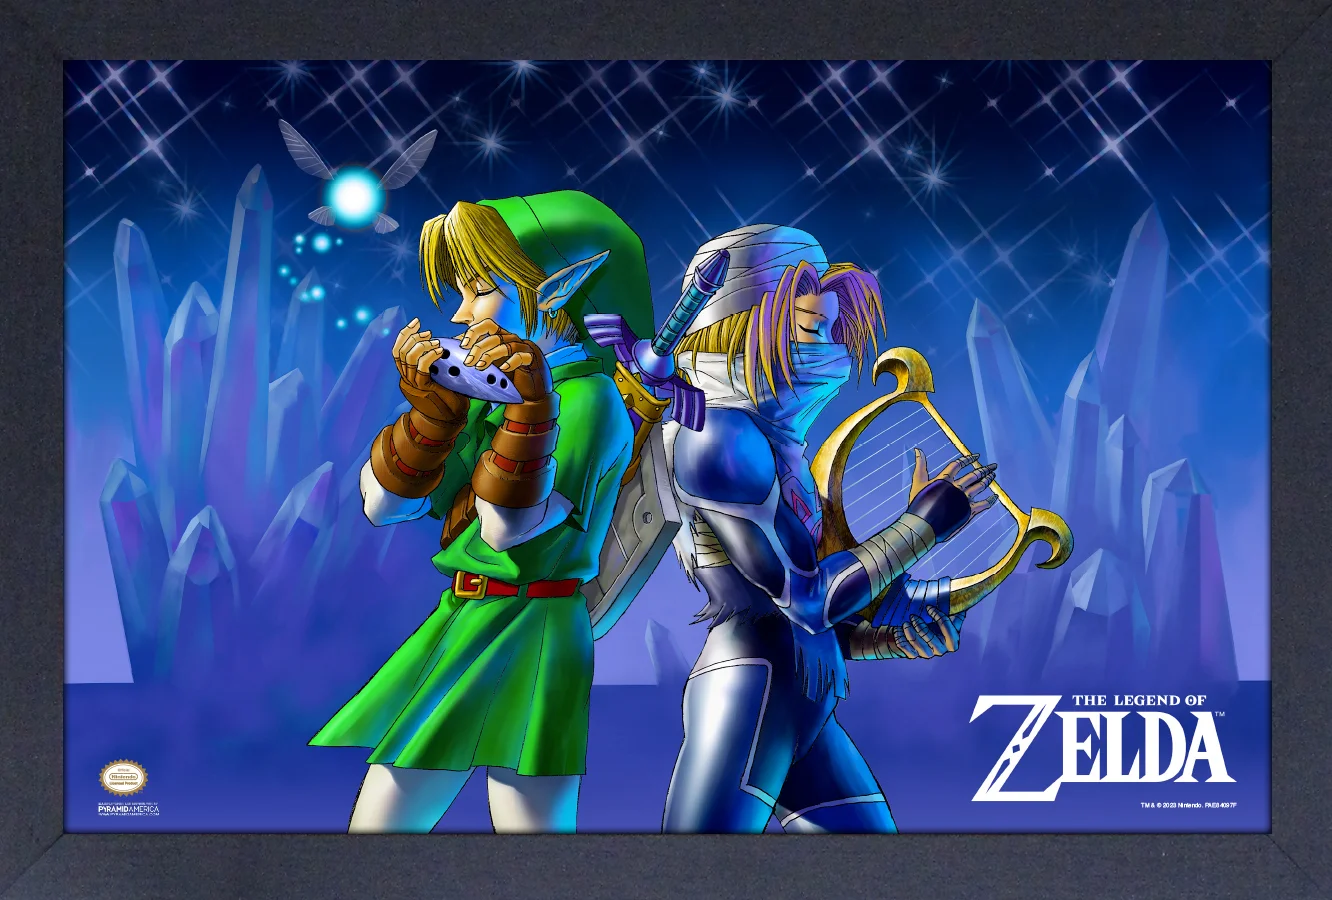 Zelda - Ocarina of Time - Link & Sheik Instruments (11"x17" Gel-Coat) (Order in multiples of 6, mix and match styles)